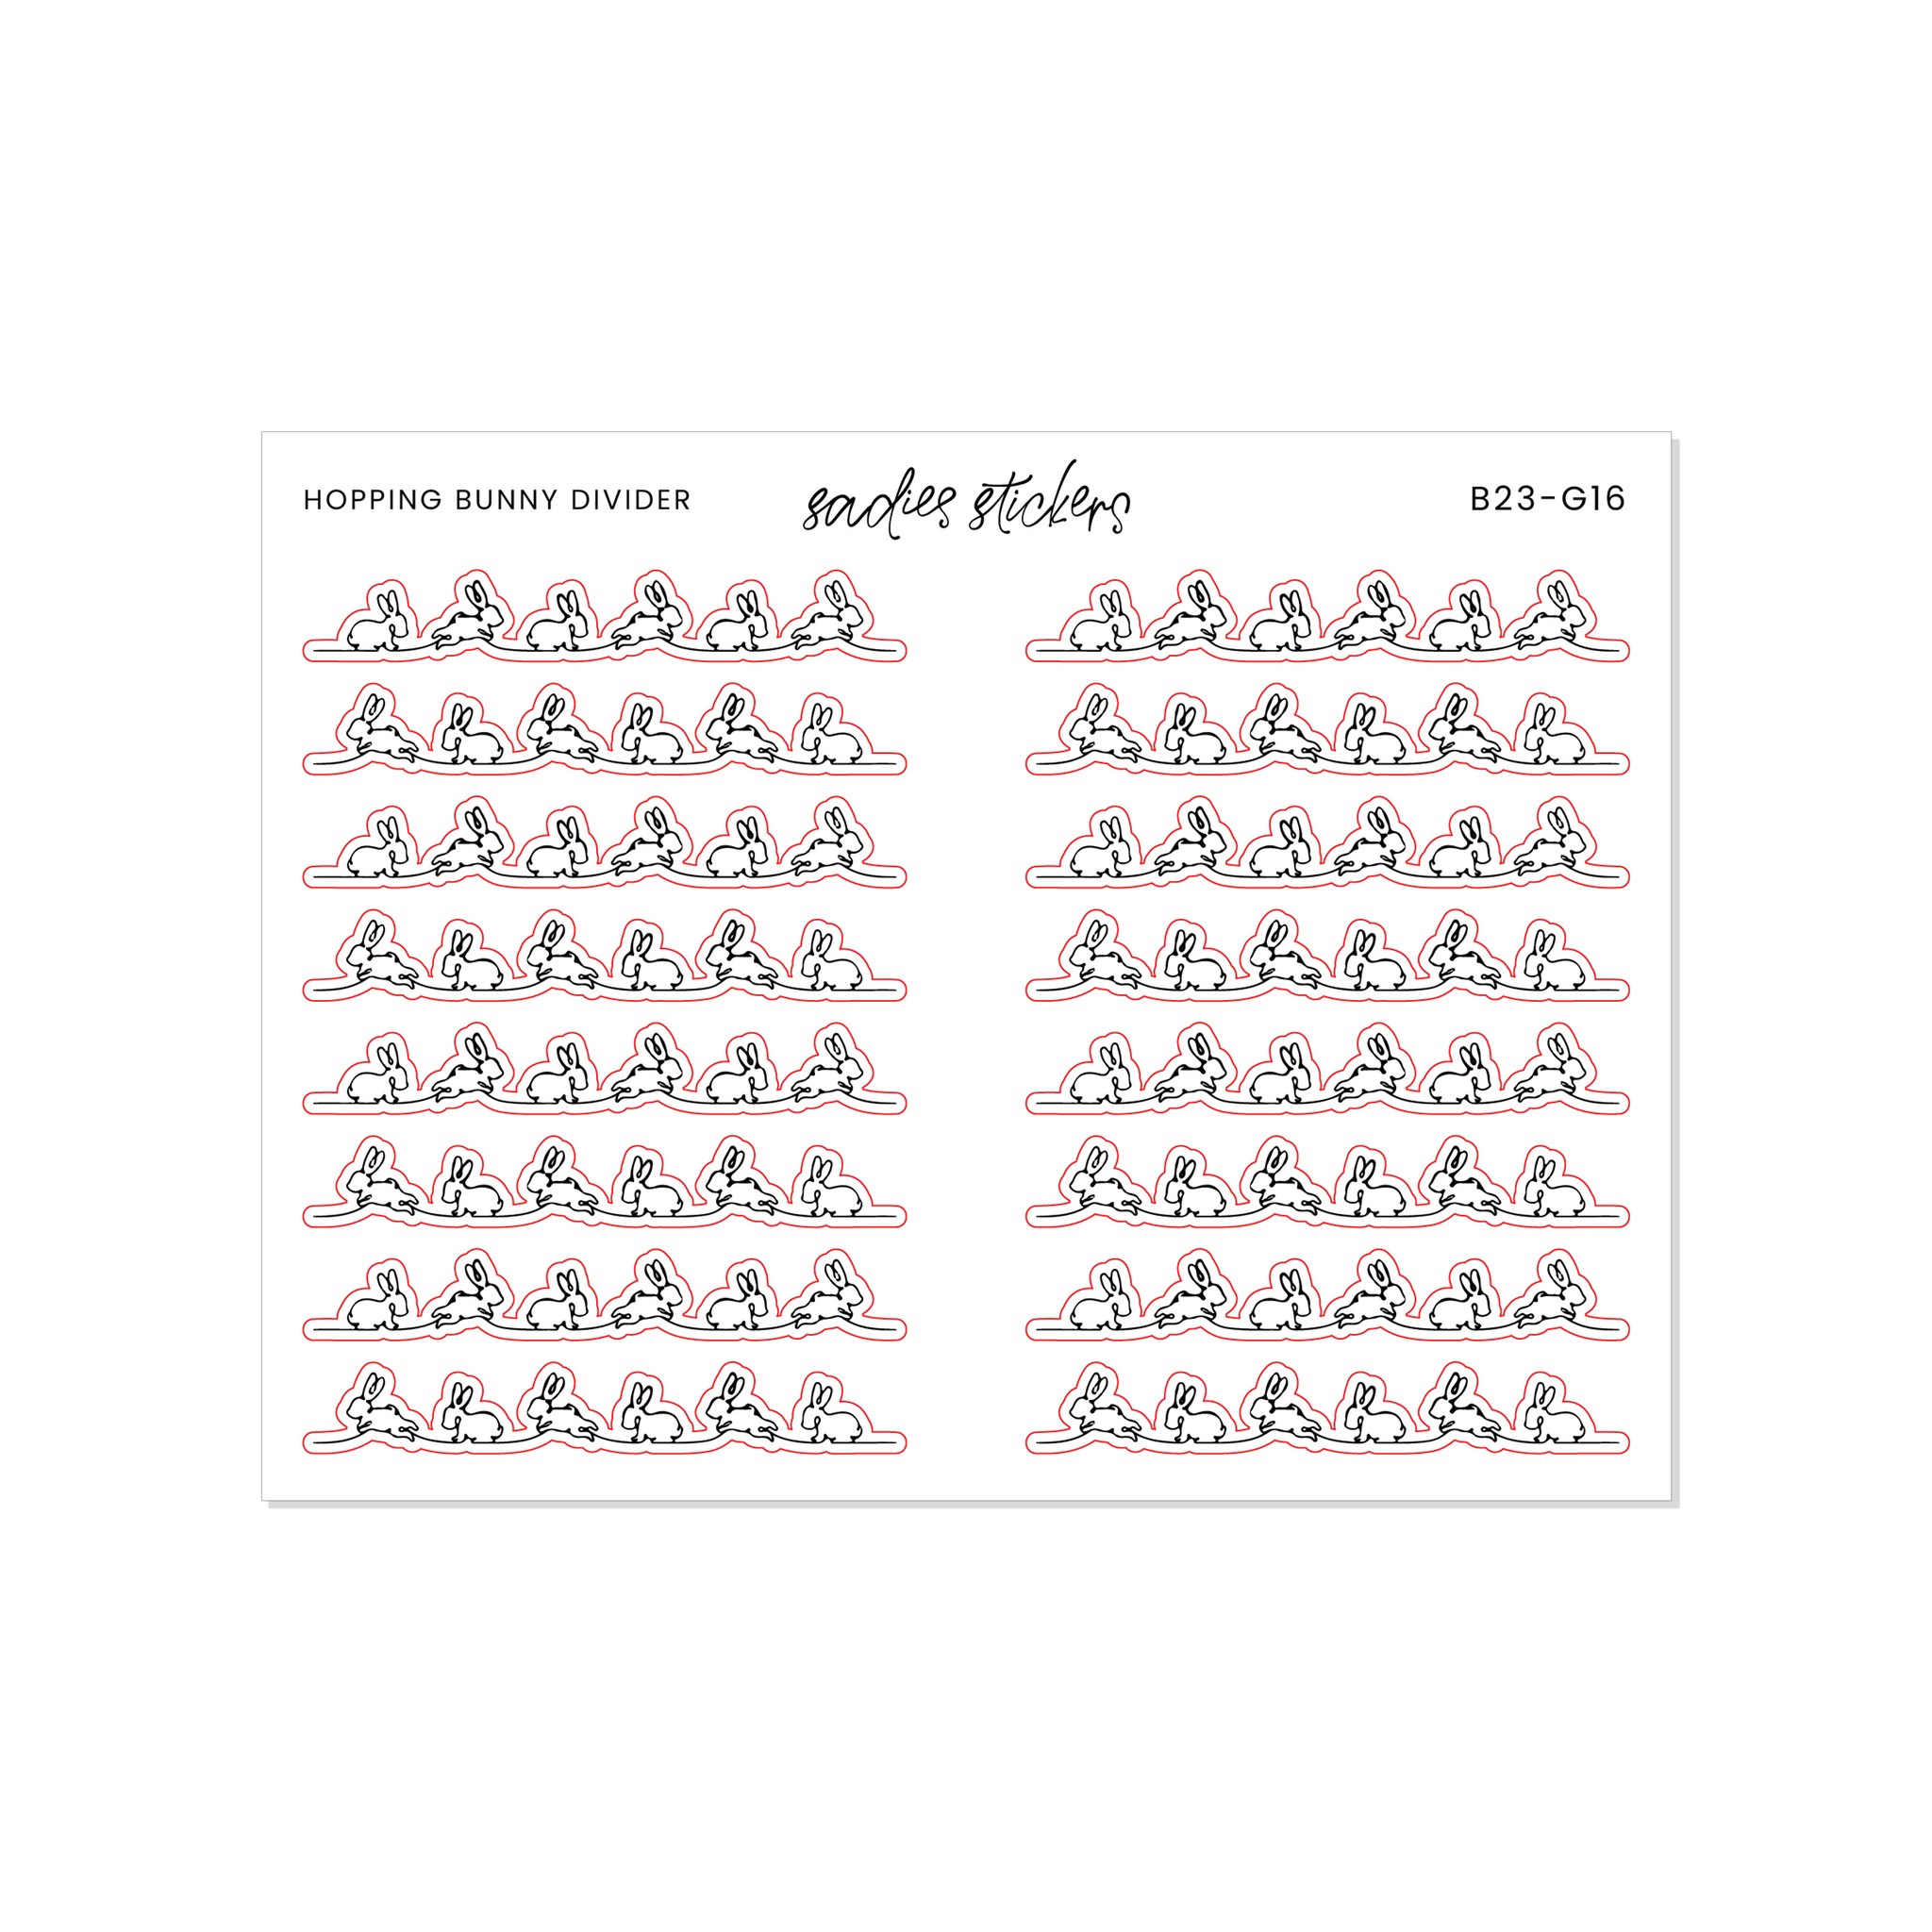 FOILED TUESDAY Hopping Bunny Divider - Sadie's Stickers